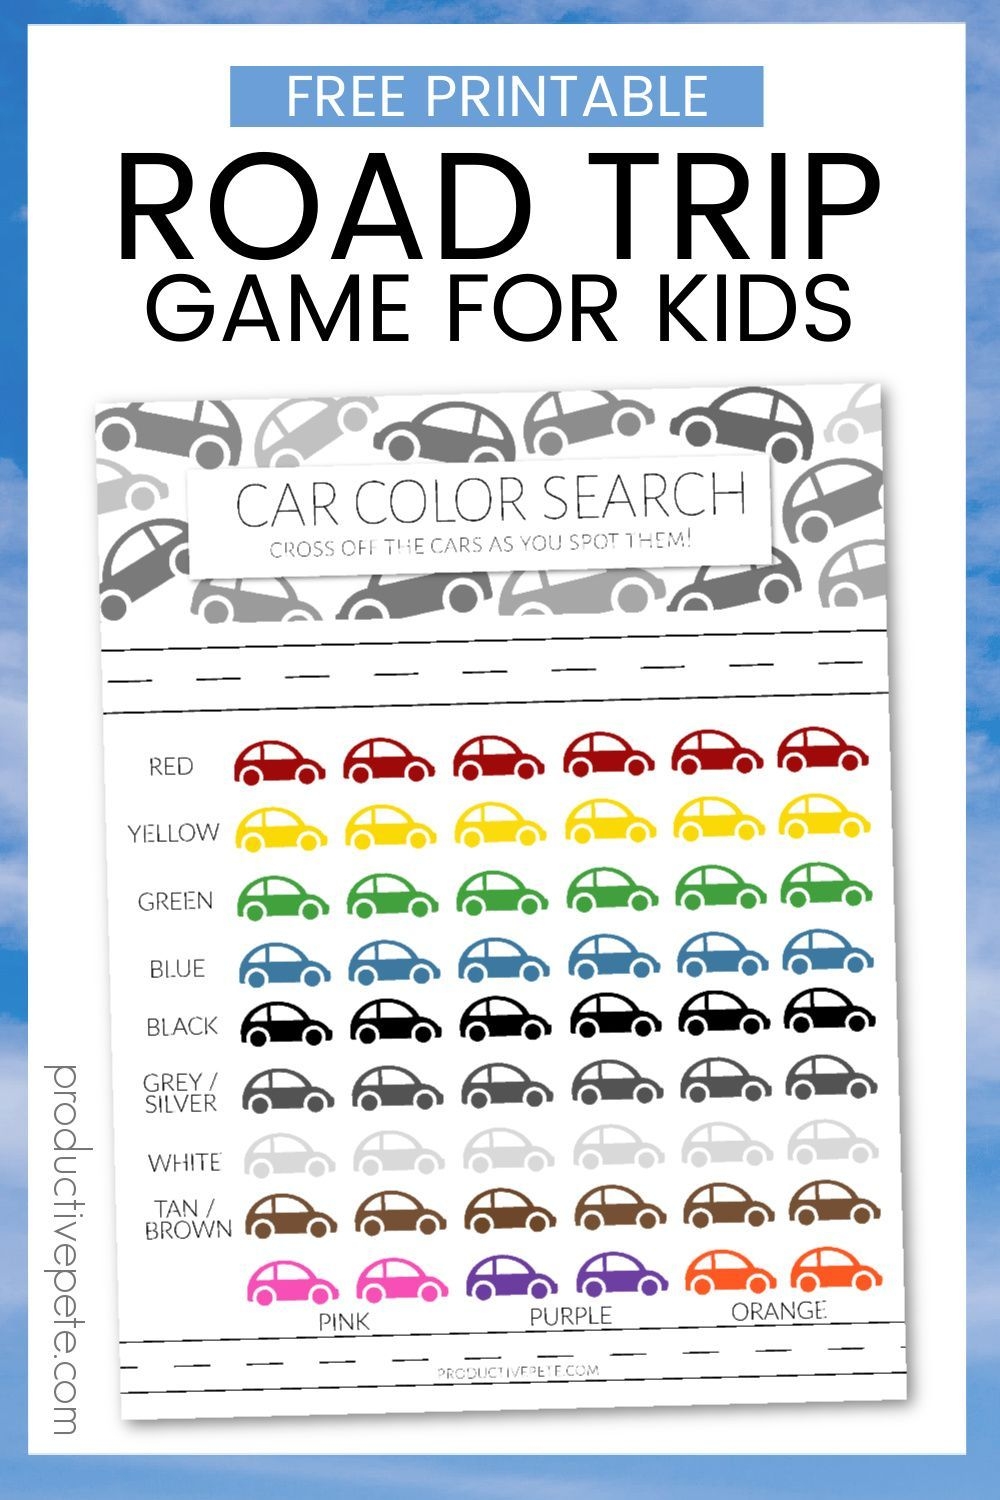 Car Color Search Printable Road Trip Game For Kids Printable Road Trip Games Road Trip Activities Road Trip Games - Free Printable Car Ride Games